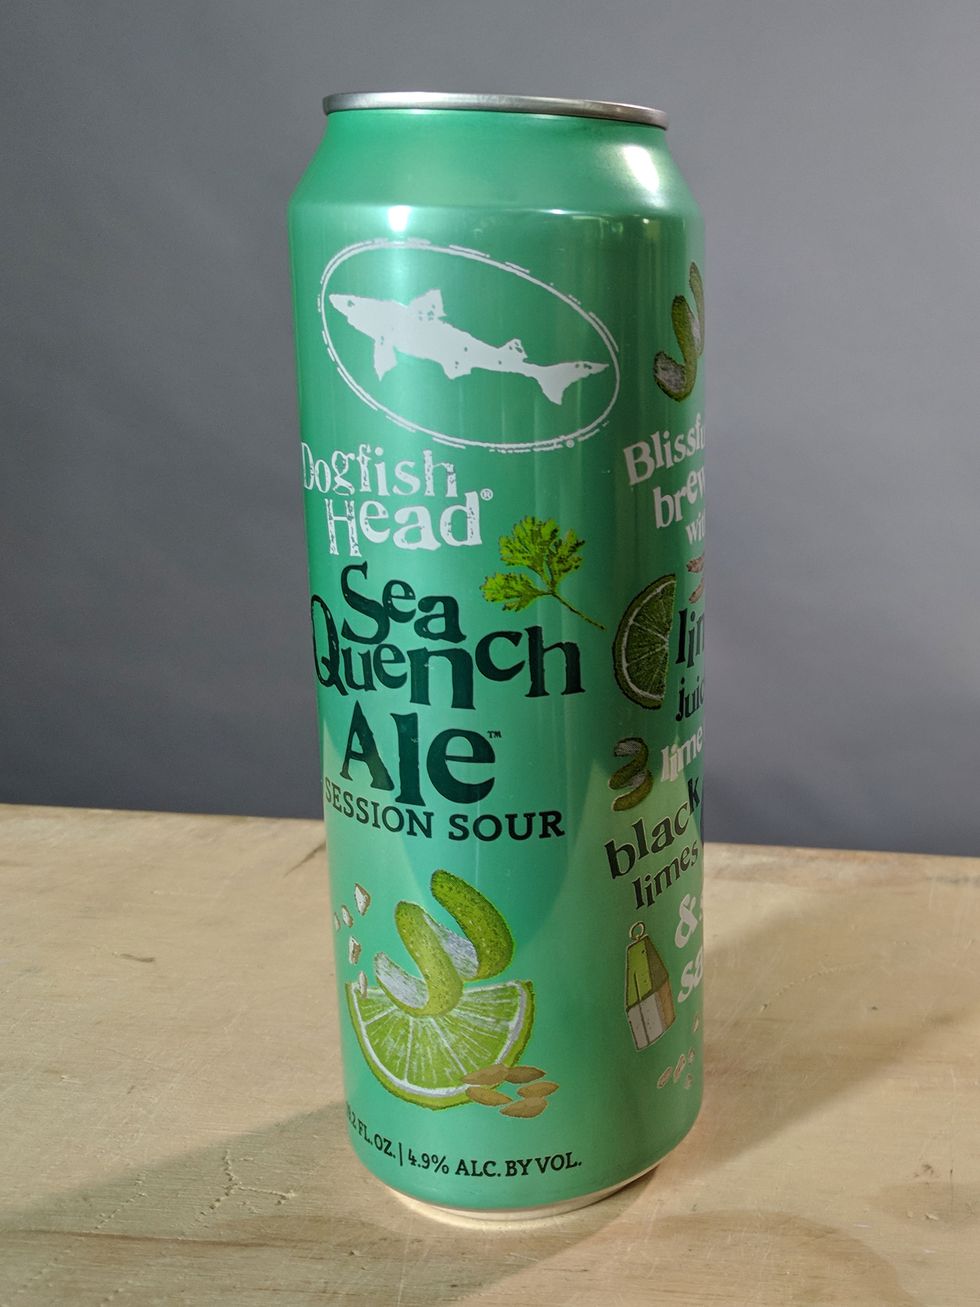 Dogfish Head SeaQuench